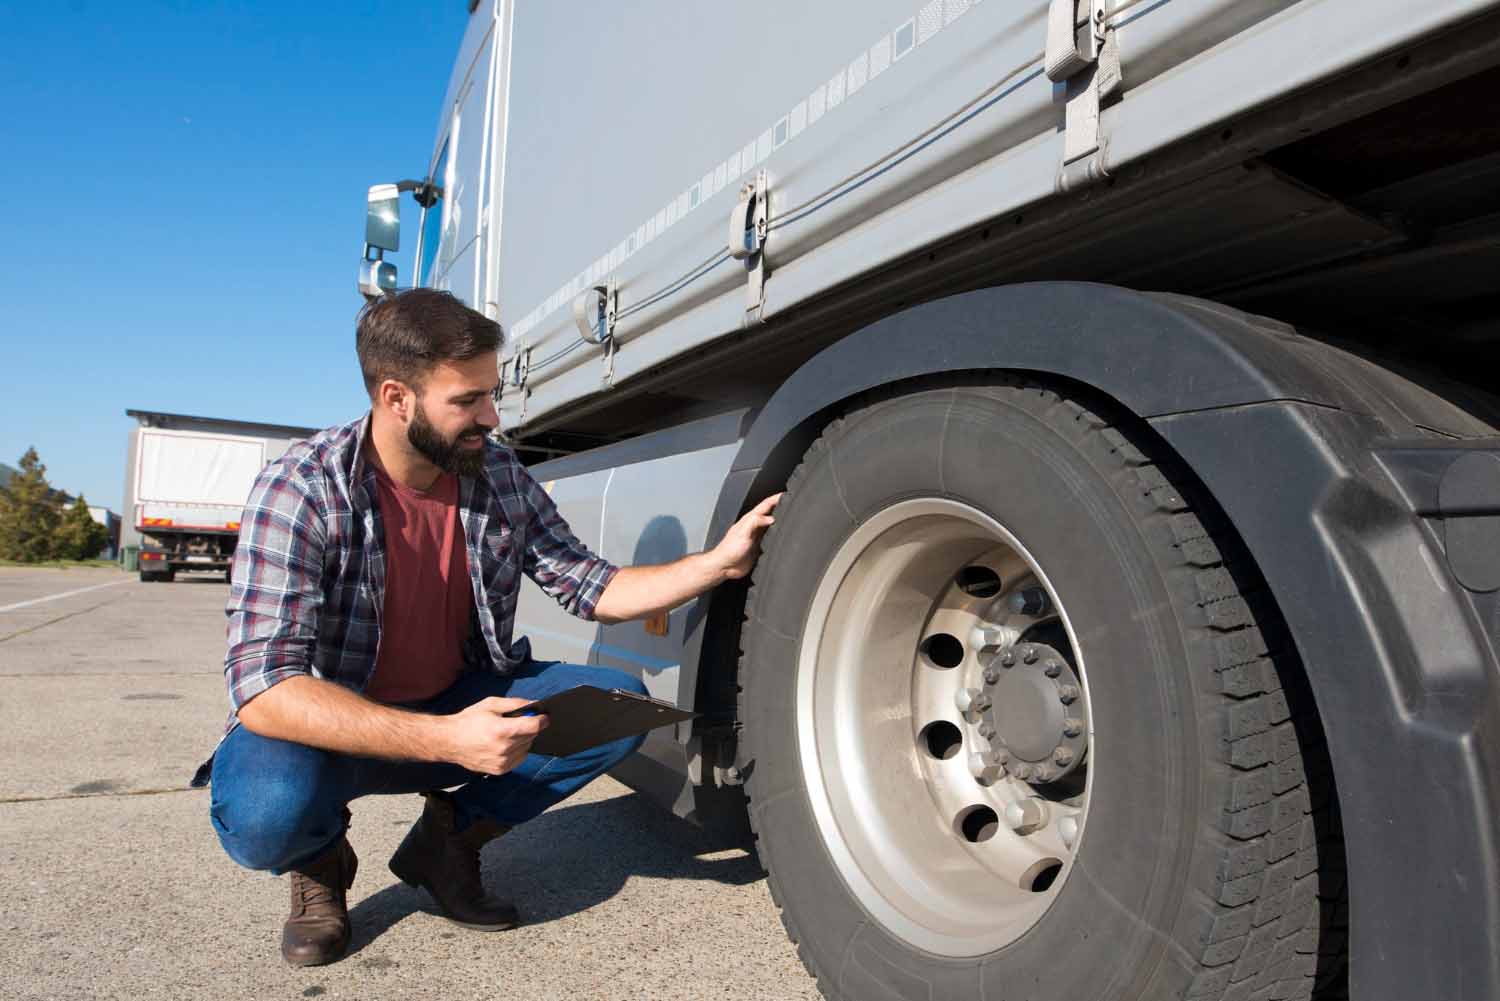 A man squating next to a semi truck inspecting one of the tires.